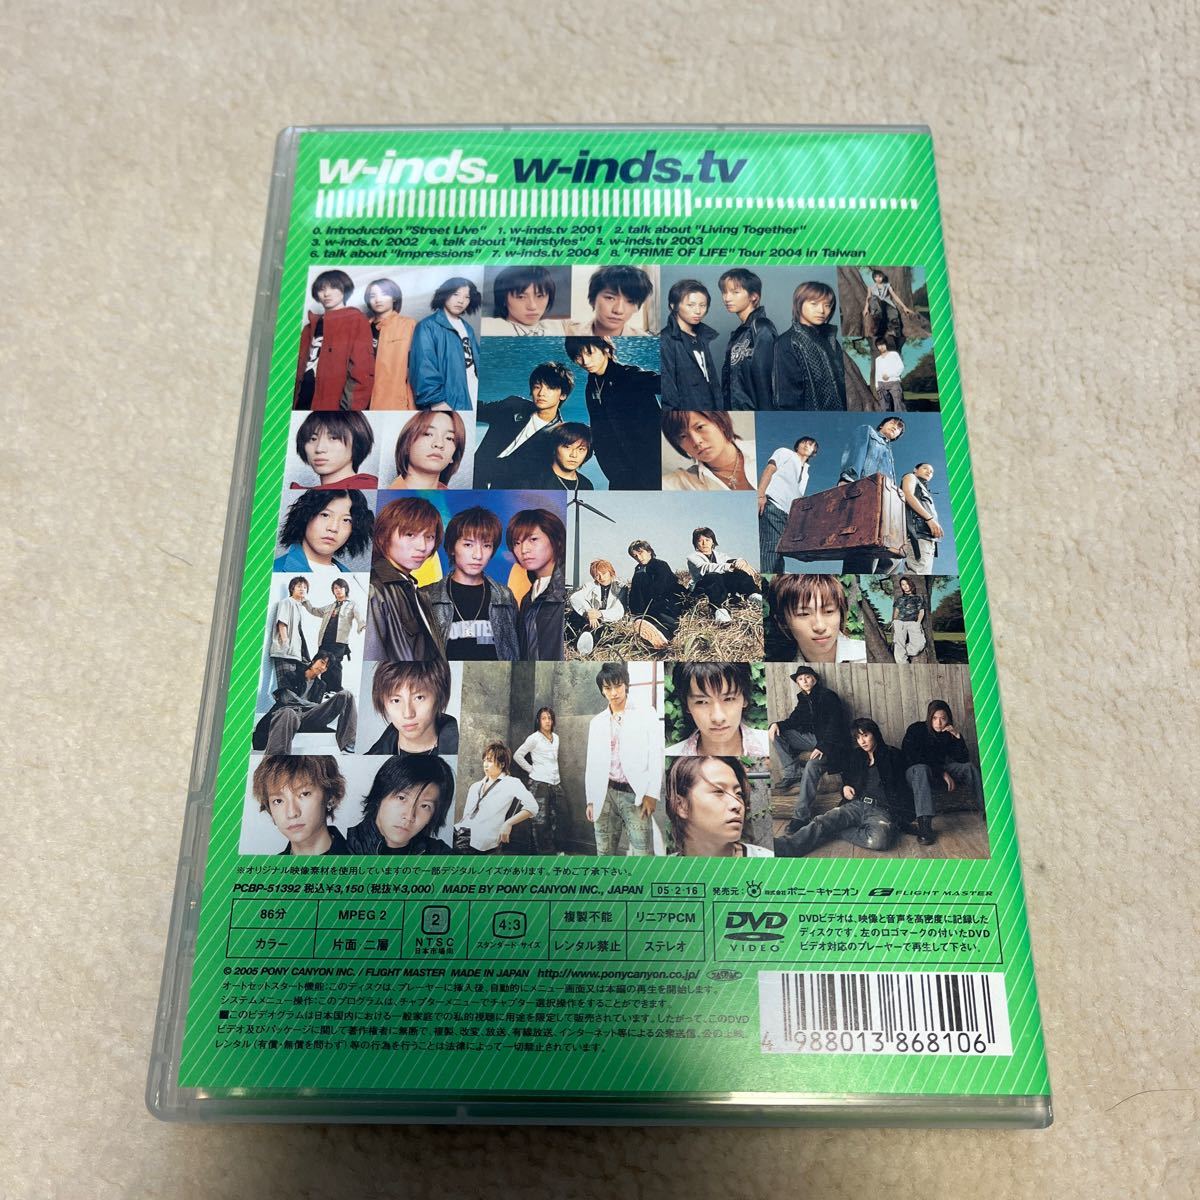 w-inds w-inds tv StarLight 2本まとめ売り DVD｜Yahoo!フリマ（旧